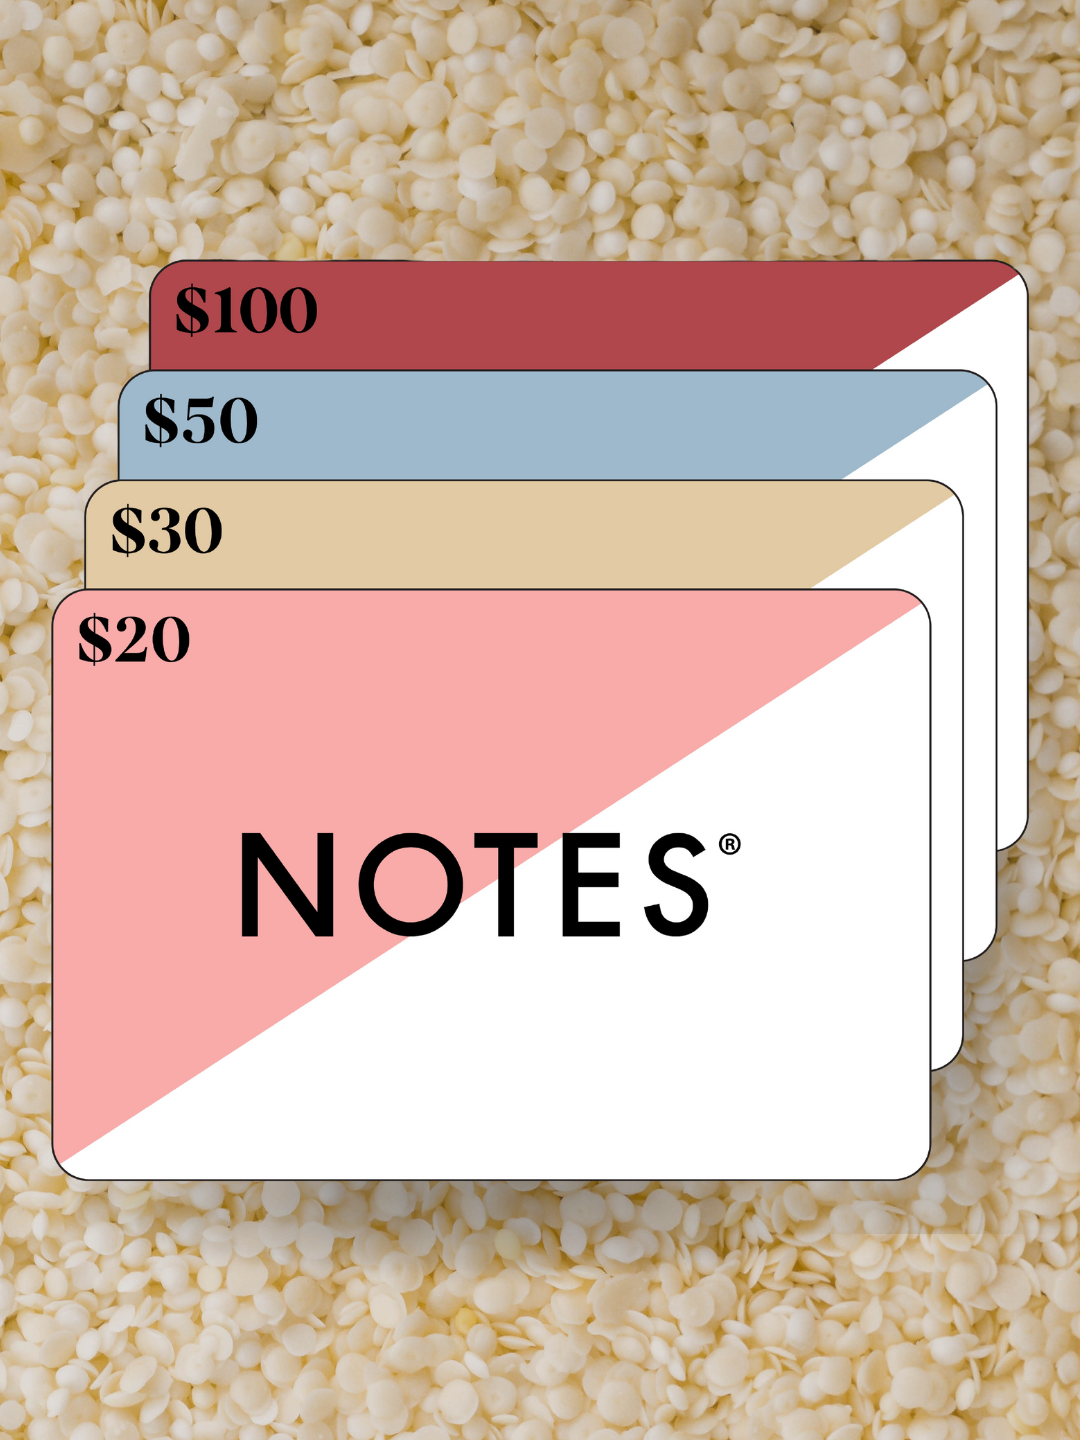 NOTES Gift Cards Ranging from $20 to $100 in Value